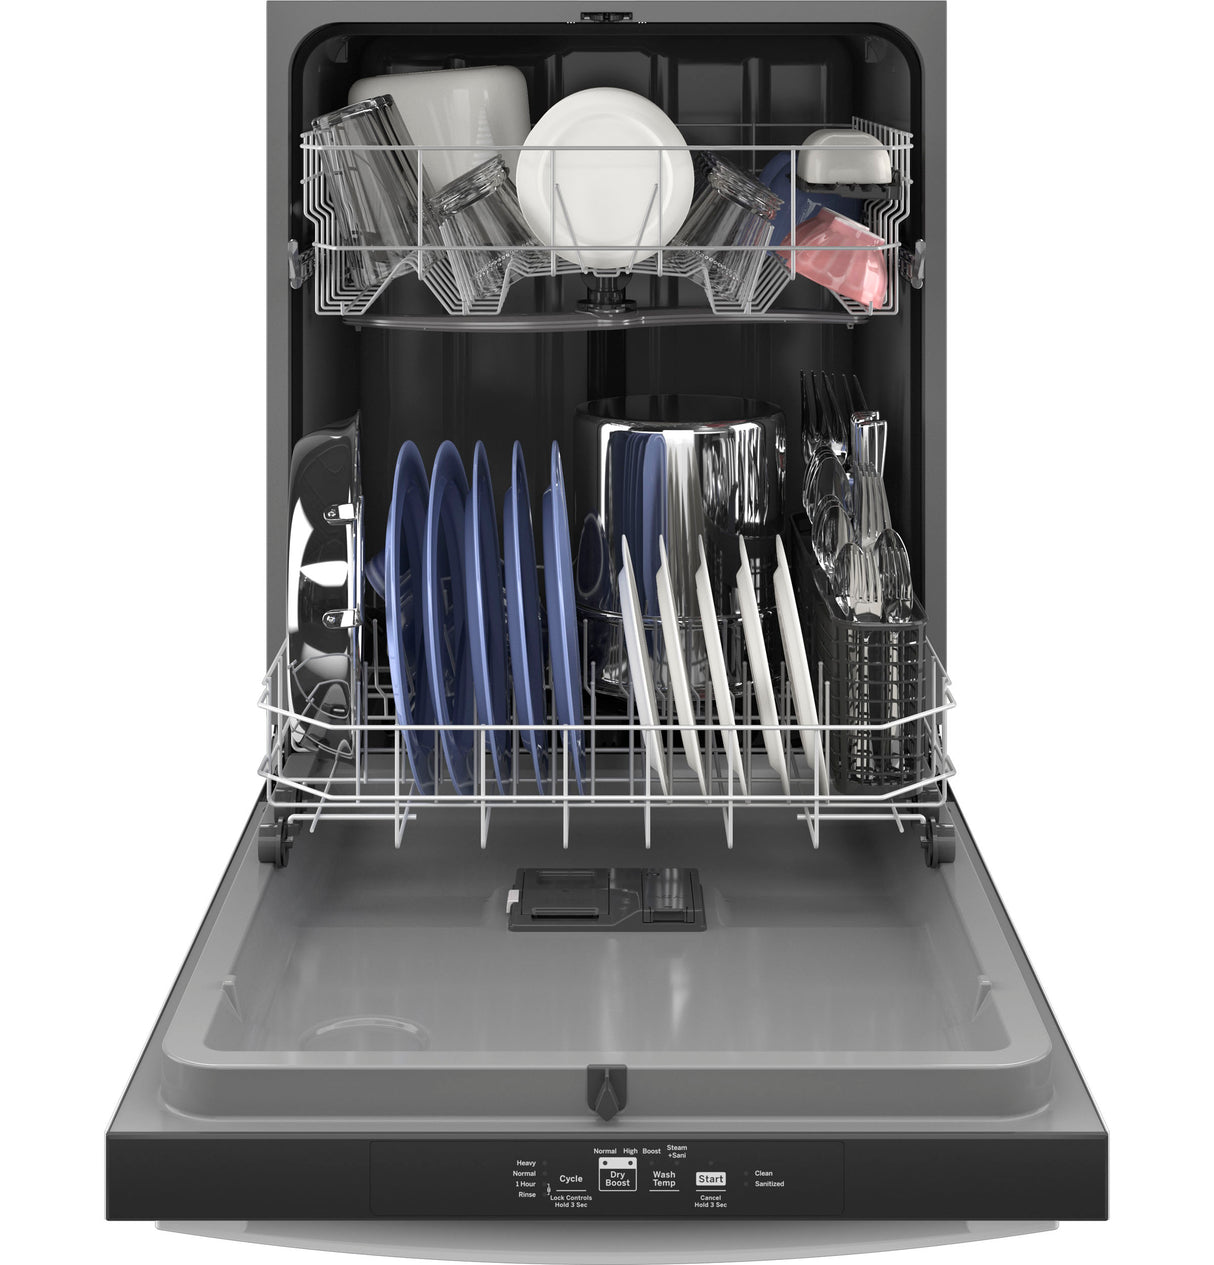 GE(R) ENERGY STAR(R) Top Control with Plastic Interior Dishwasher with Sanitize Cycle & Dry Boost - (GDT535PGRWW)